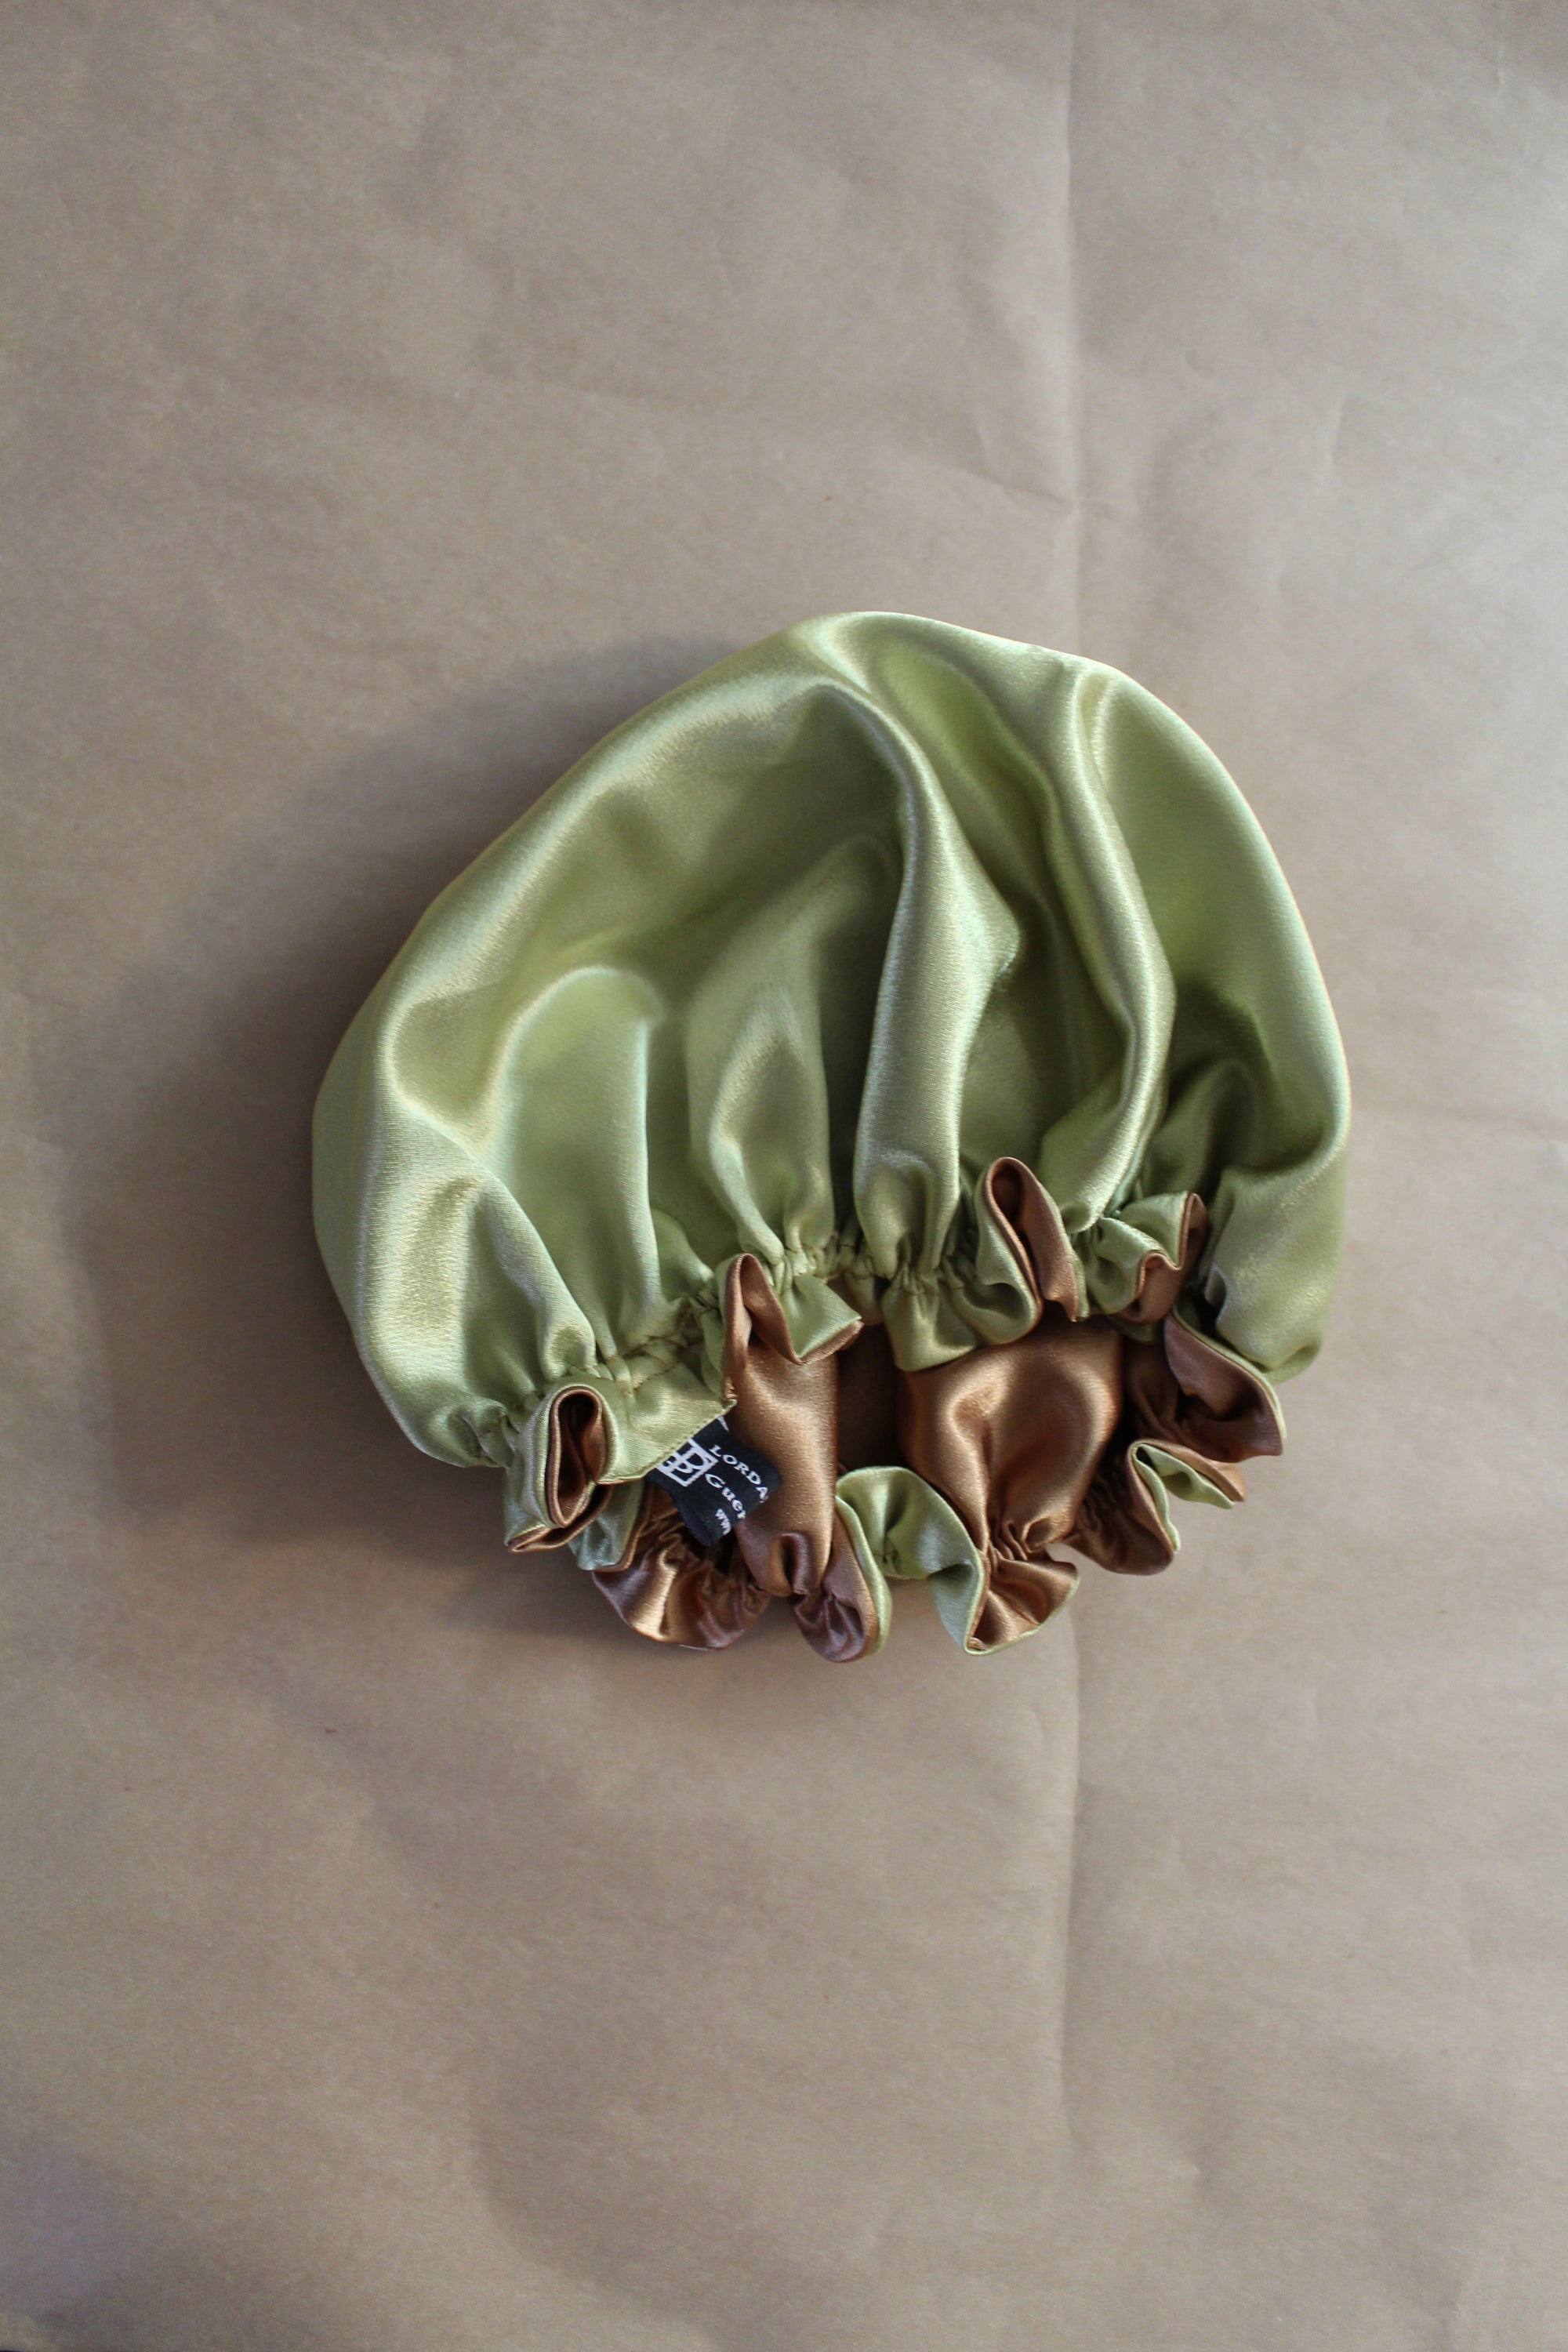 The Lydya  Reversible Satin colored Bonnets